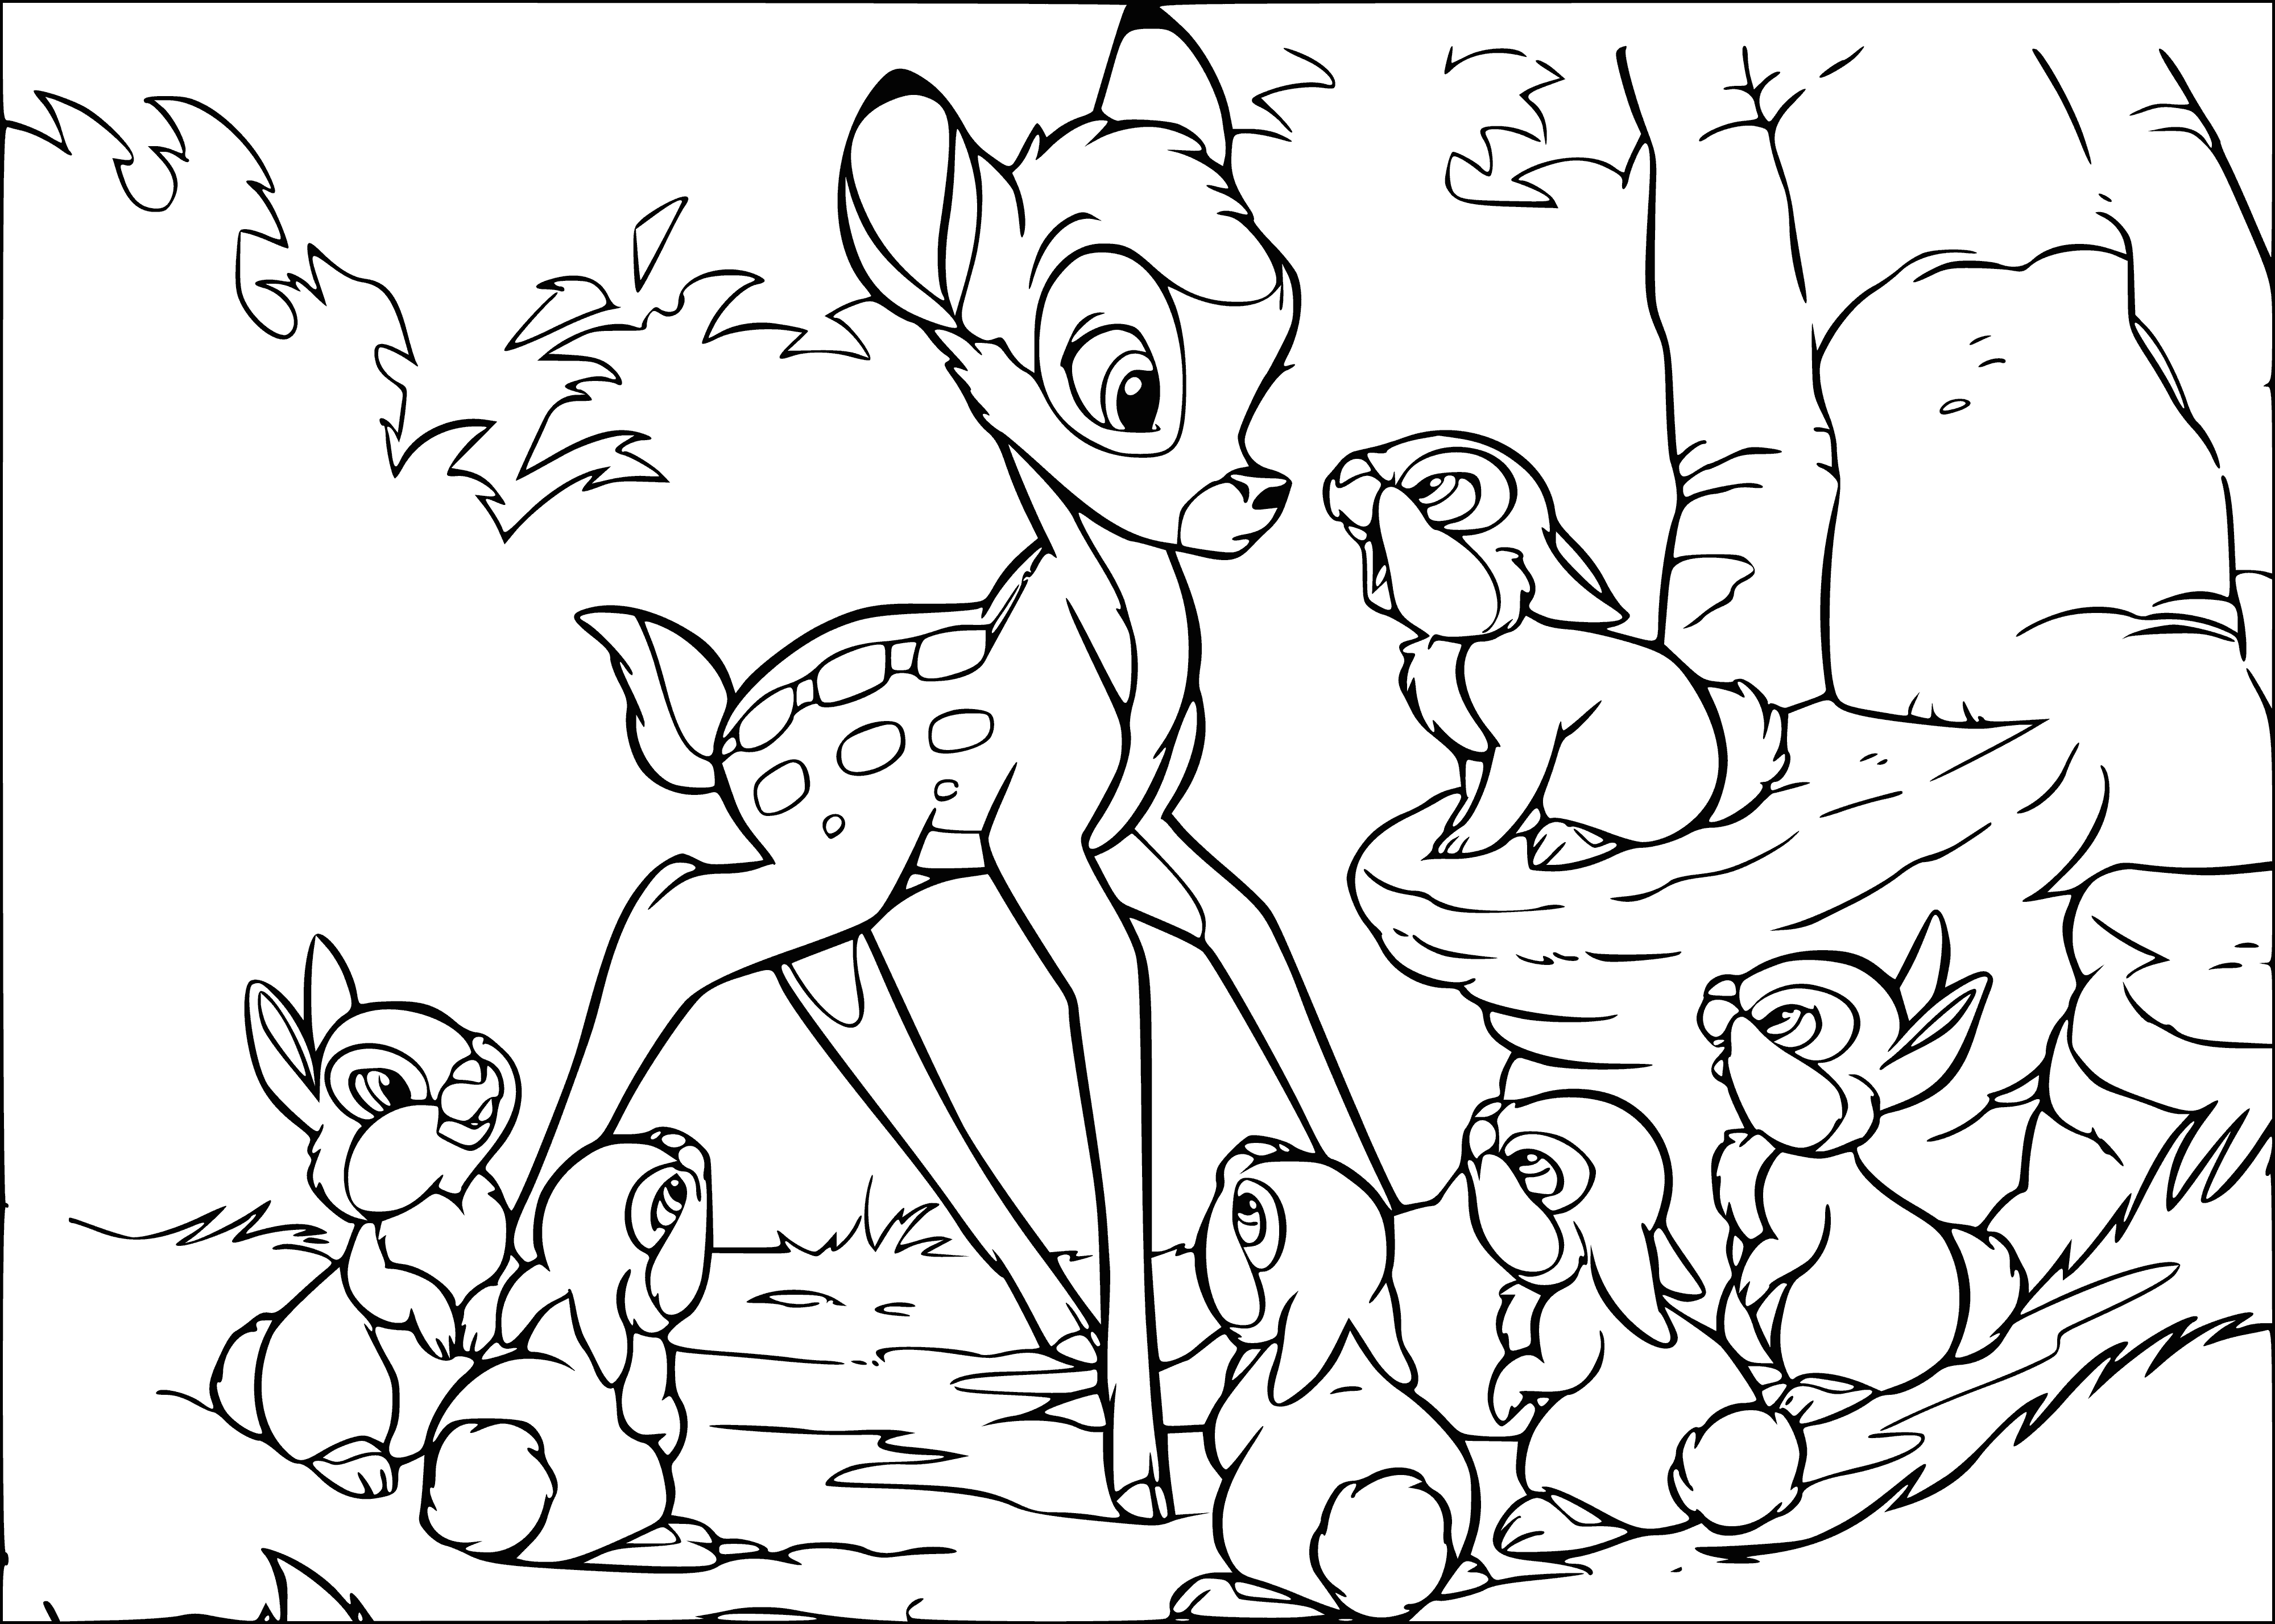 coloring page: A hare and a deer, the former ready to run, are featured in a coloring page. The deer looks with big brown eyes.